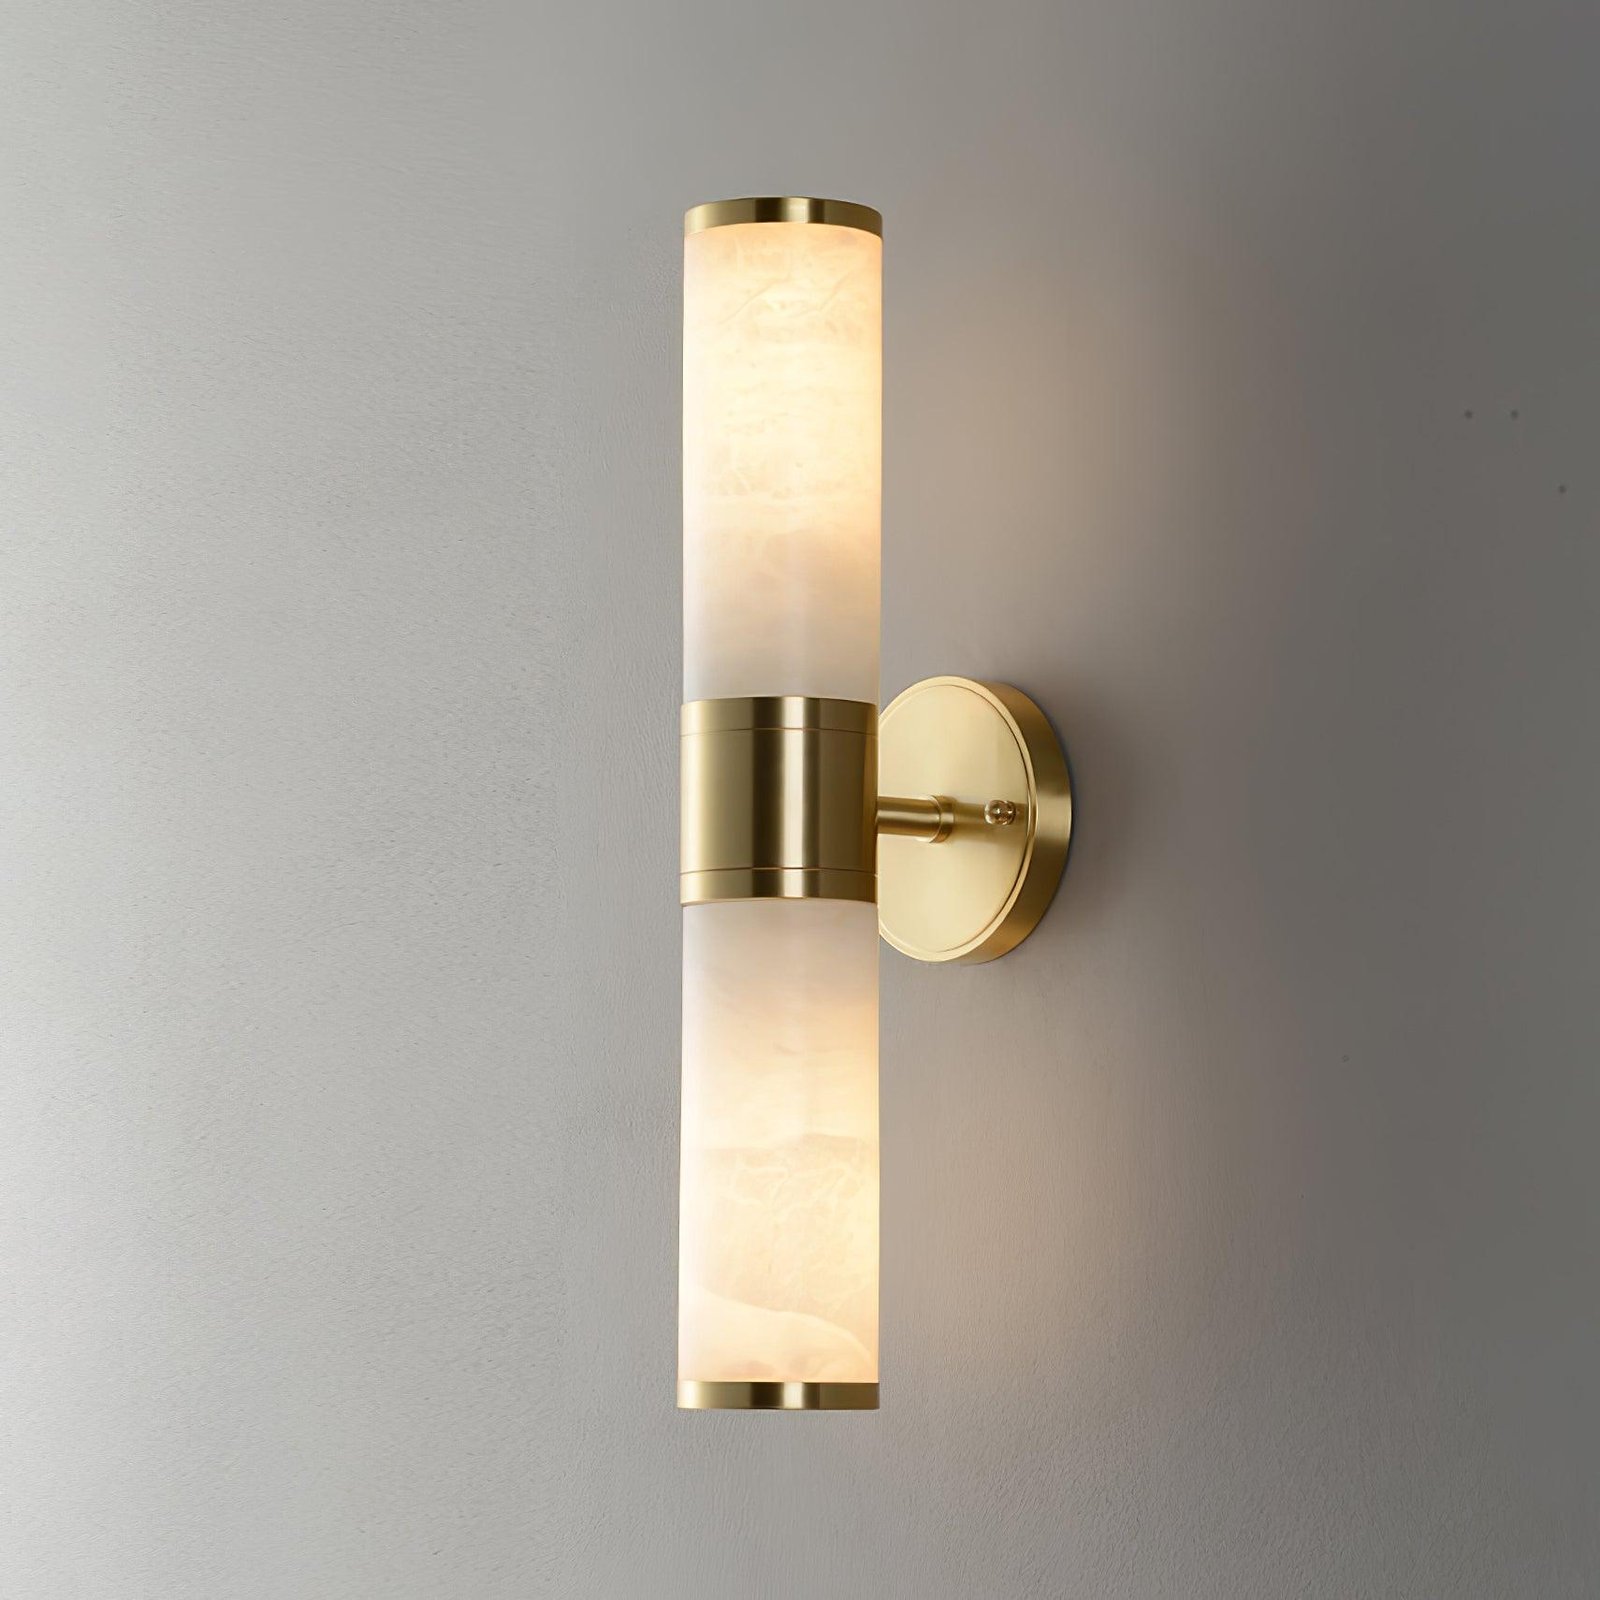 Marble Wall Lamp, Lampatron, Brass and White, Diameter 3.1" x Height 18.9" (8cm x 48cm)